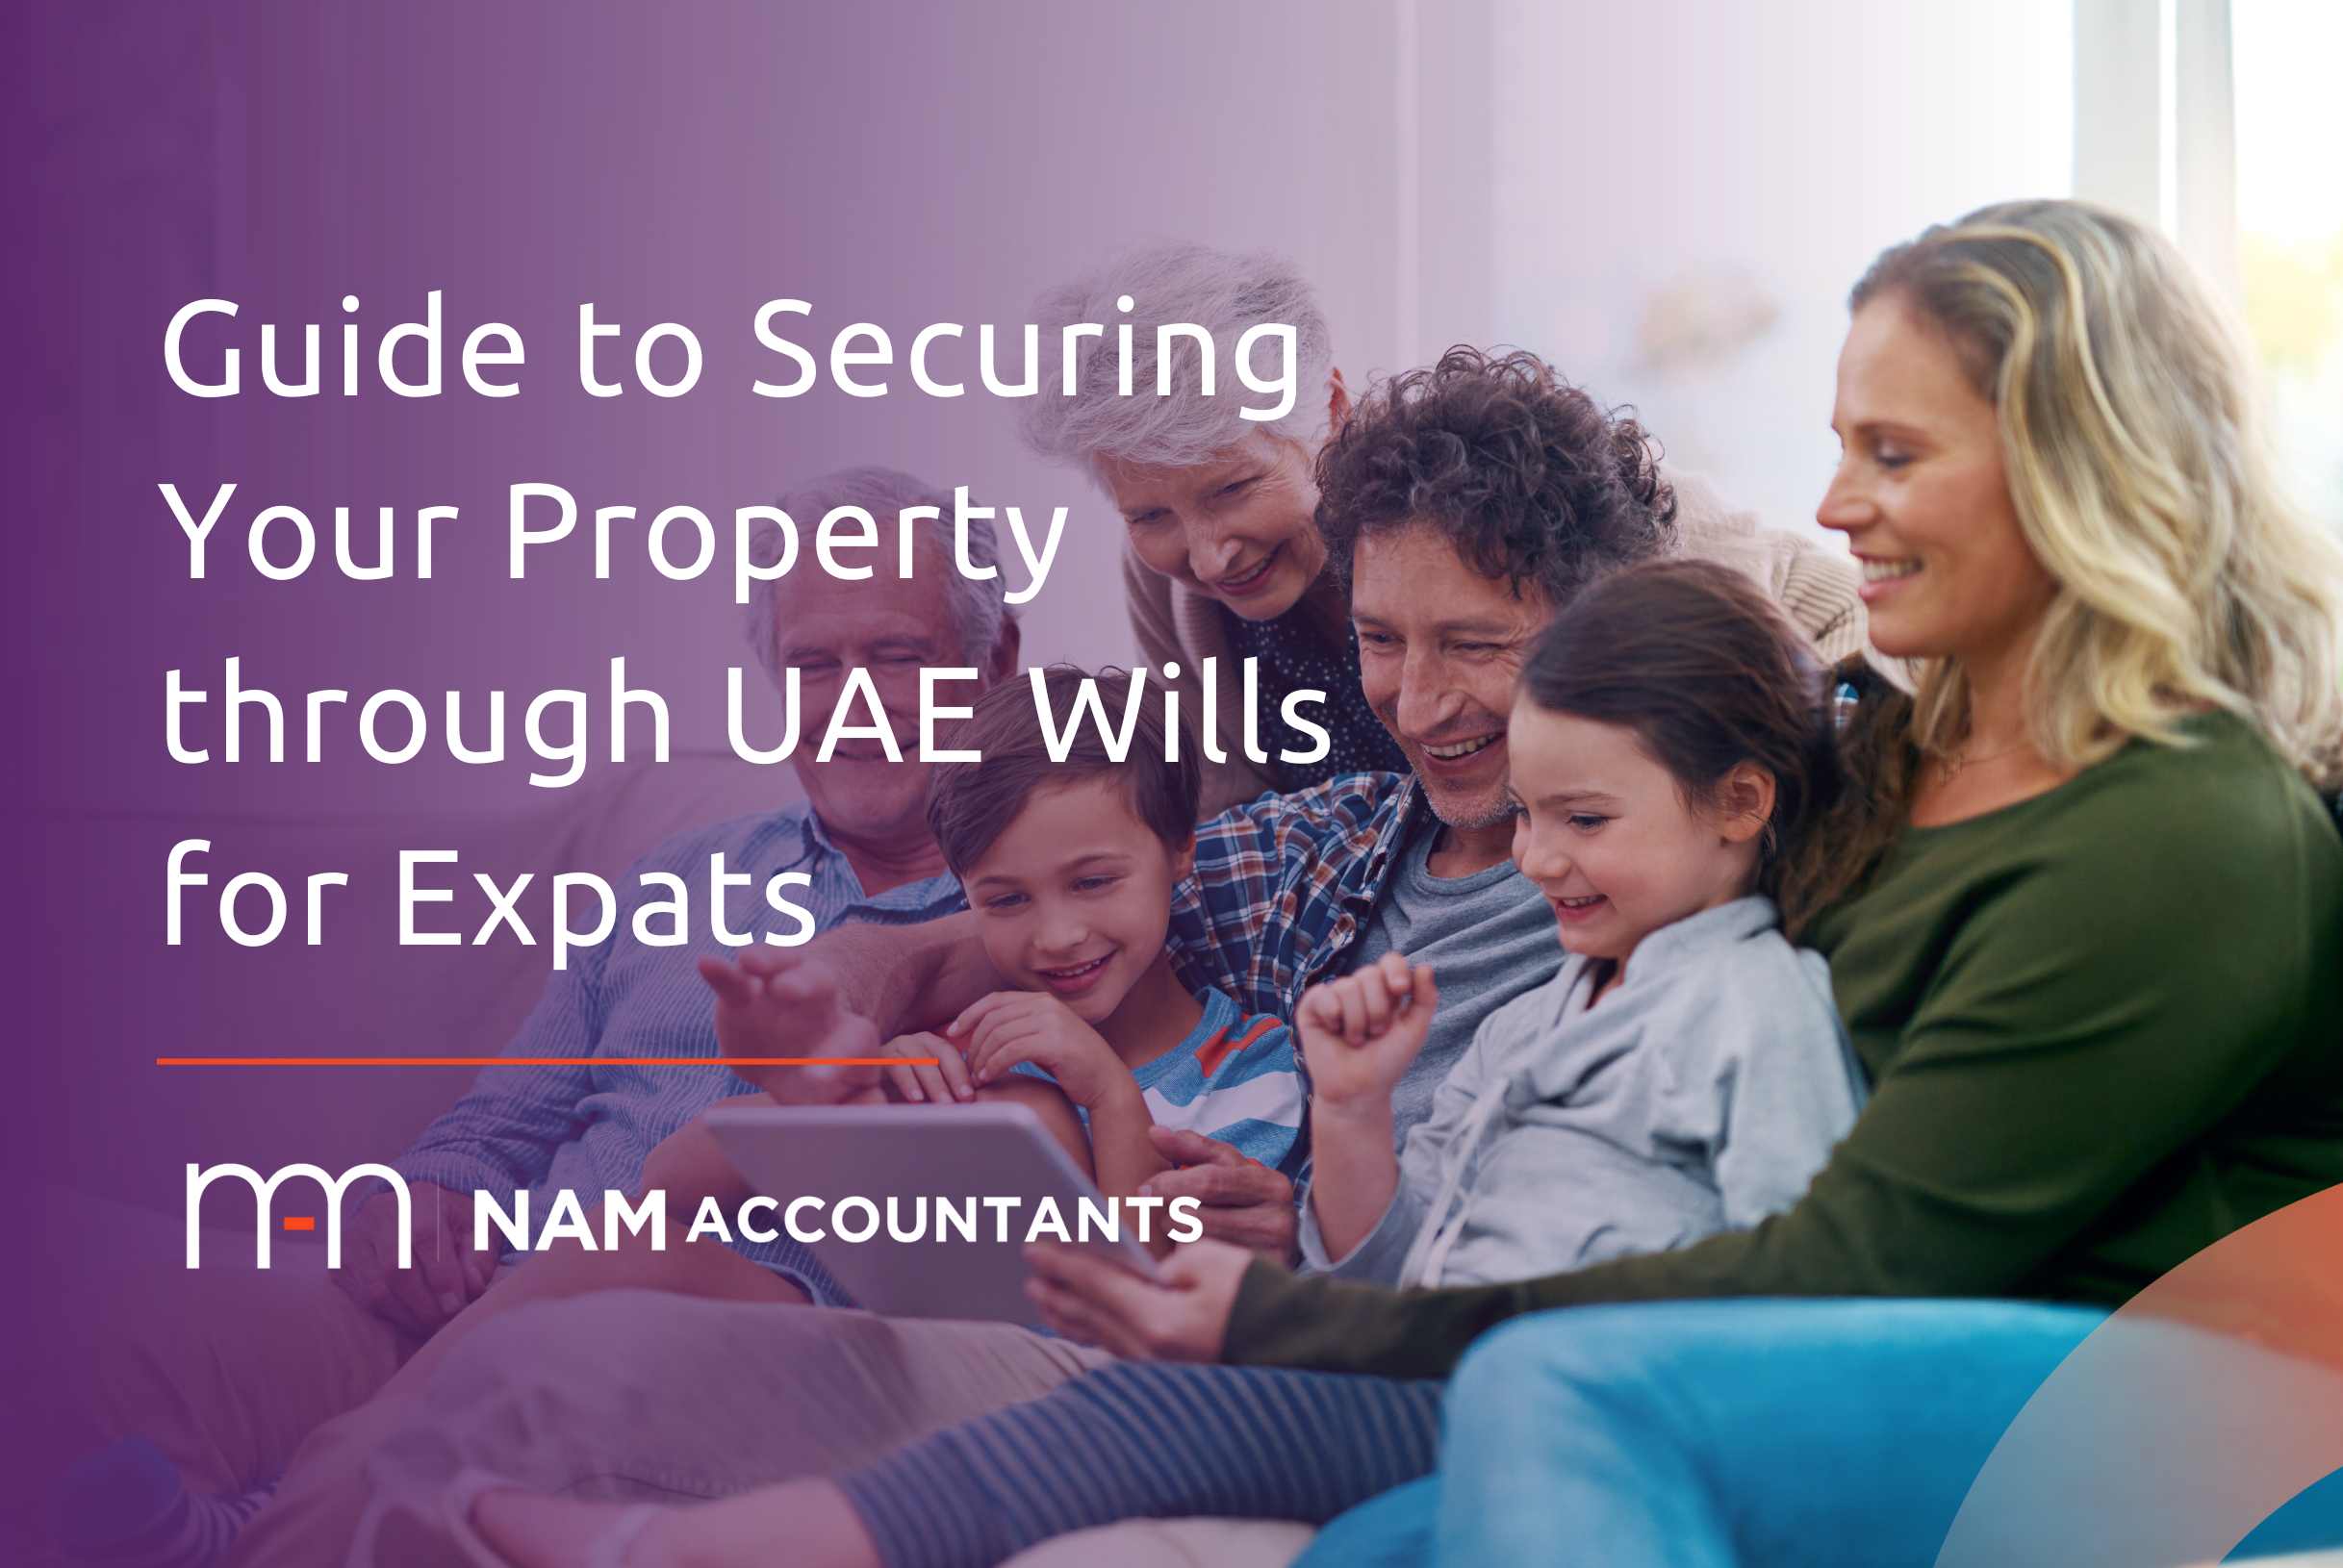 Guide to Securing Your Property through UAE Wills for Expats